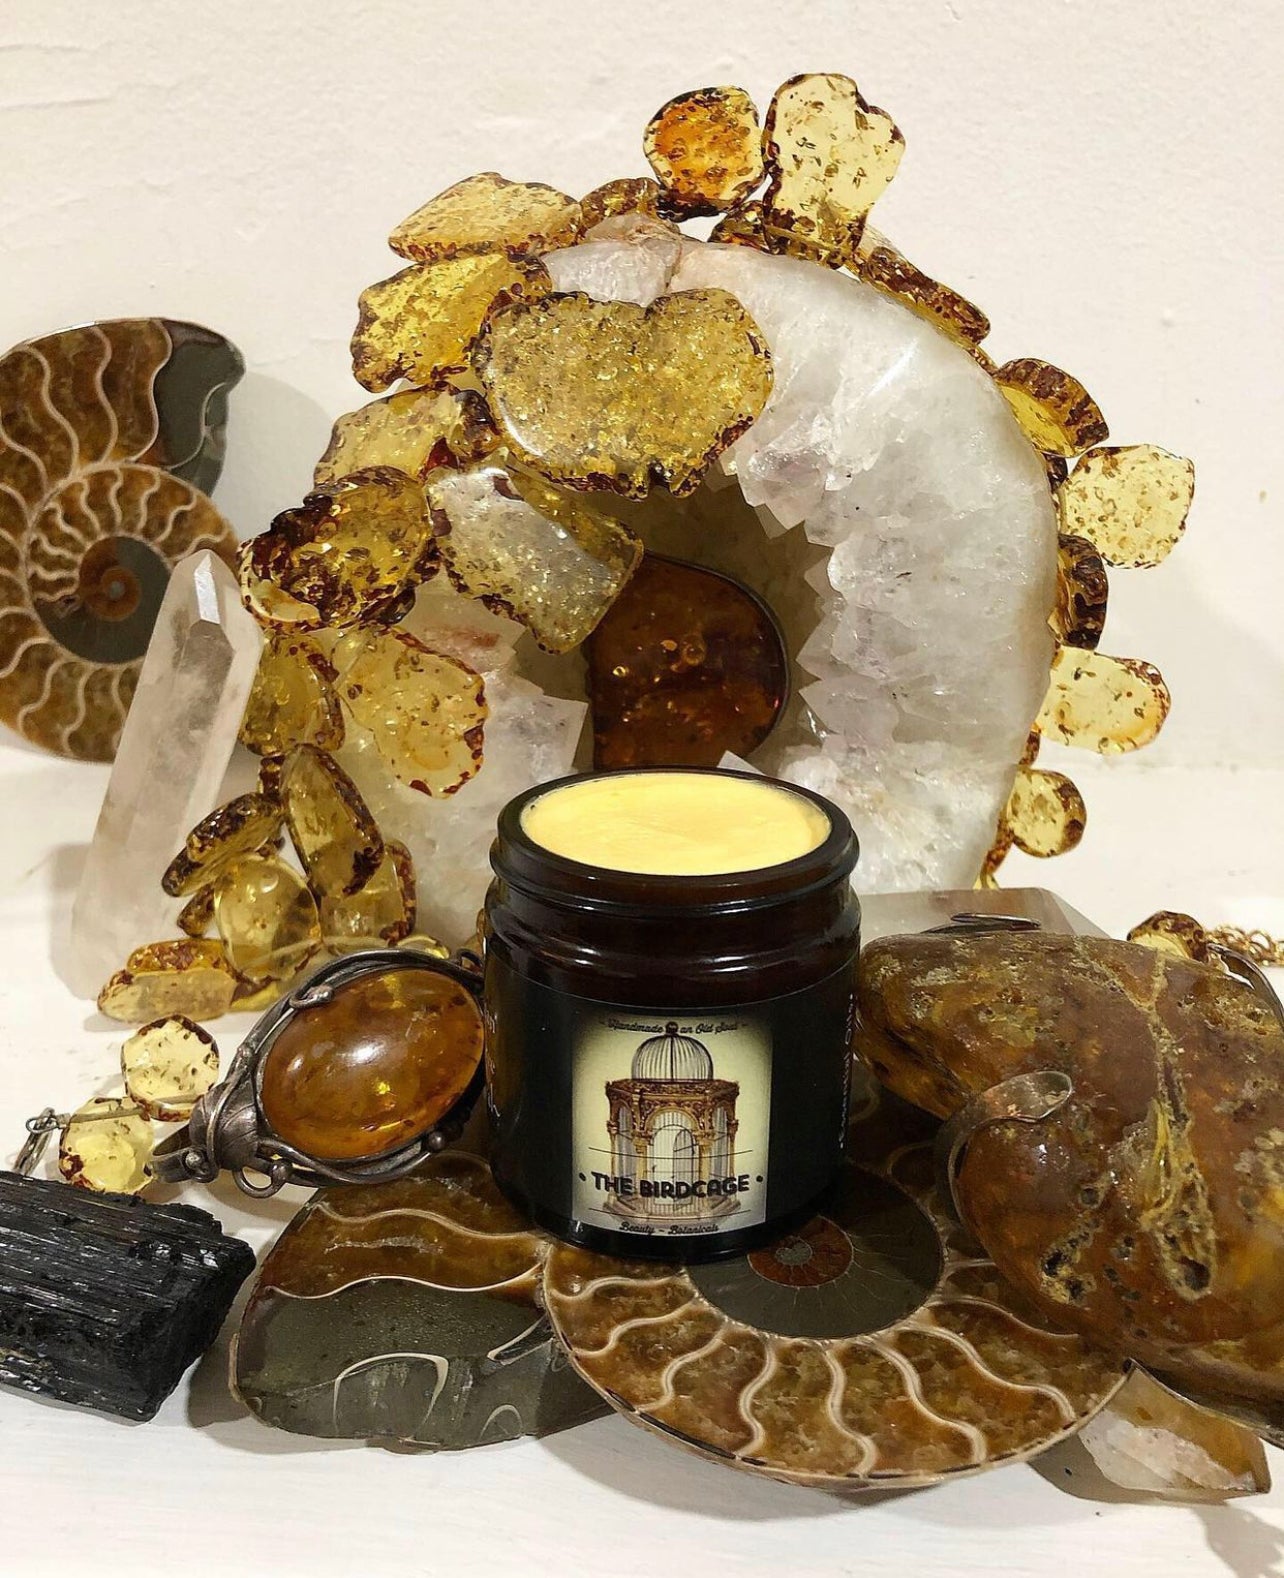 Amber Resin Essential Oil - 100% Steam Distilled from Fossilised resin